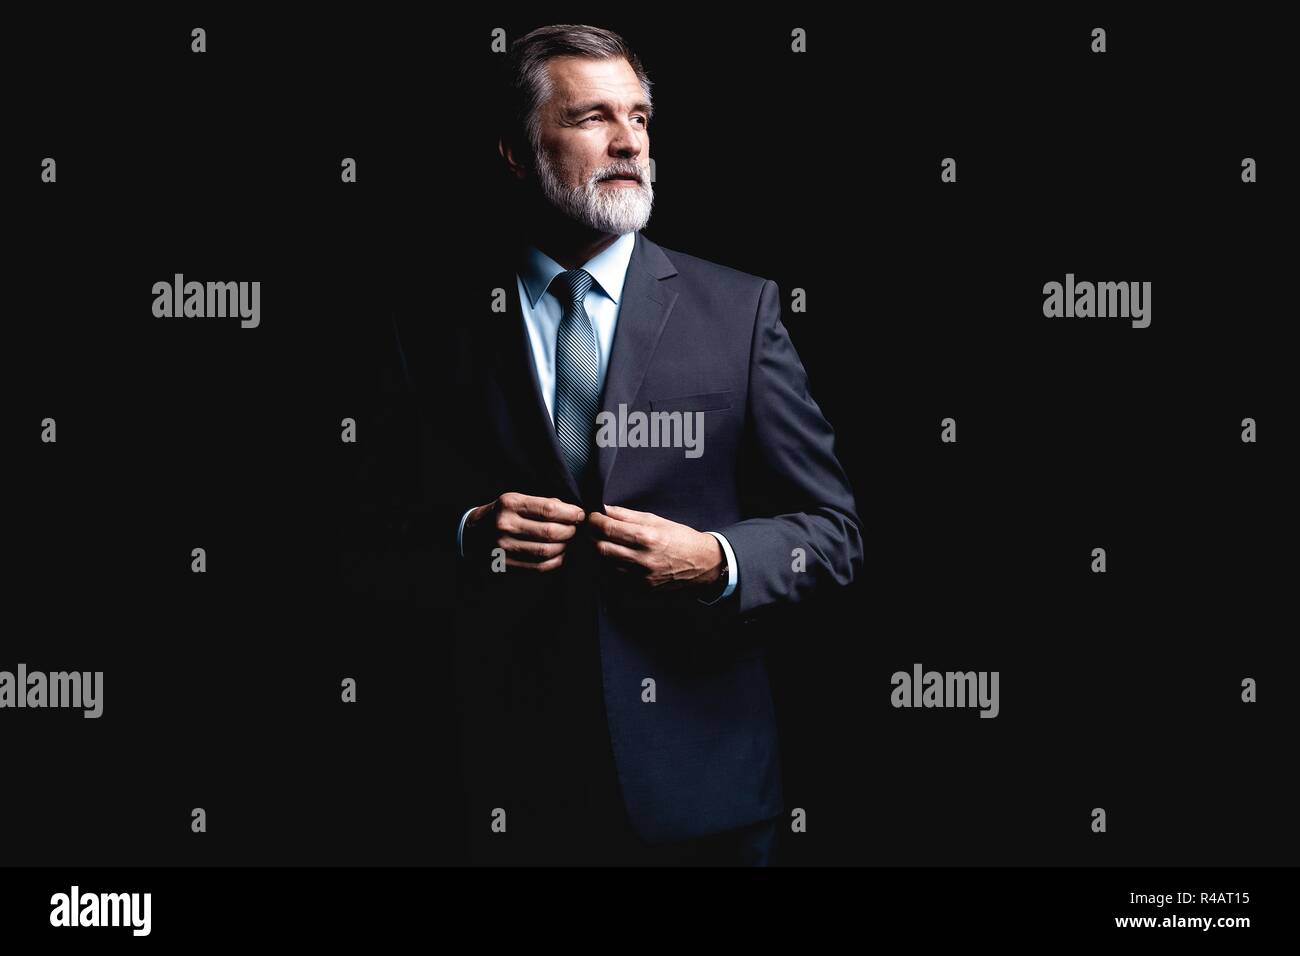 Handsome mature business man isolated on black background Stock Photo